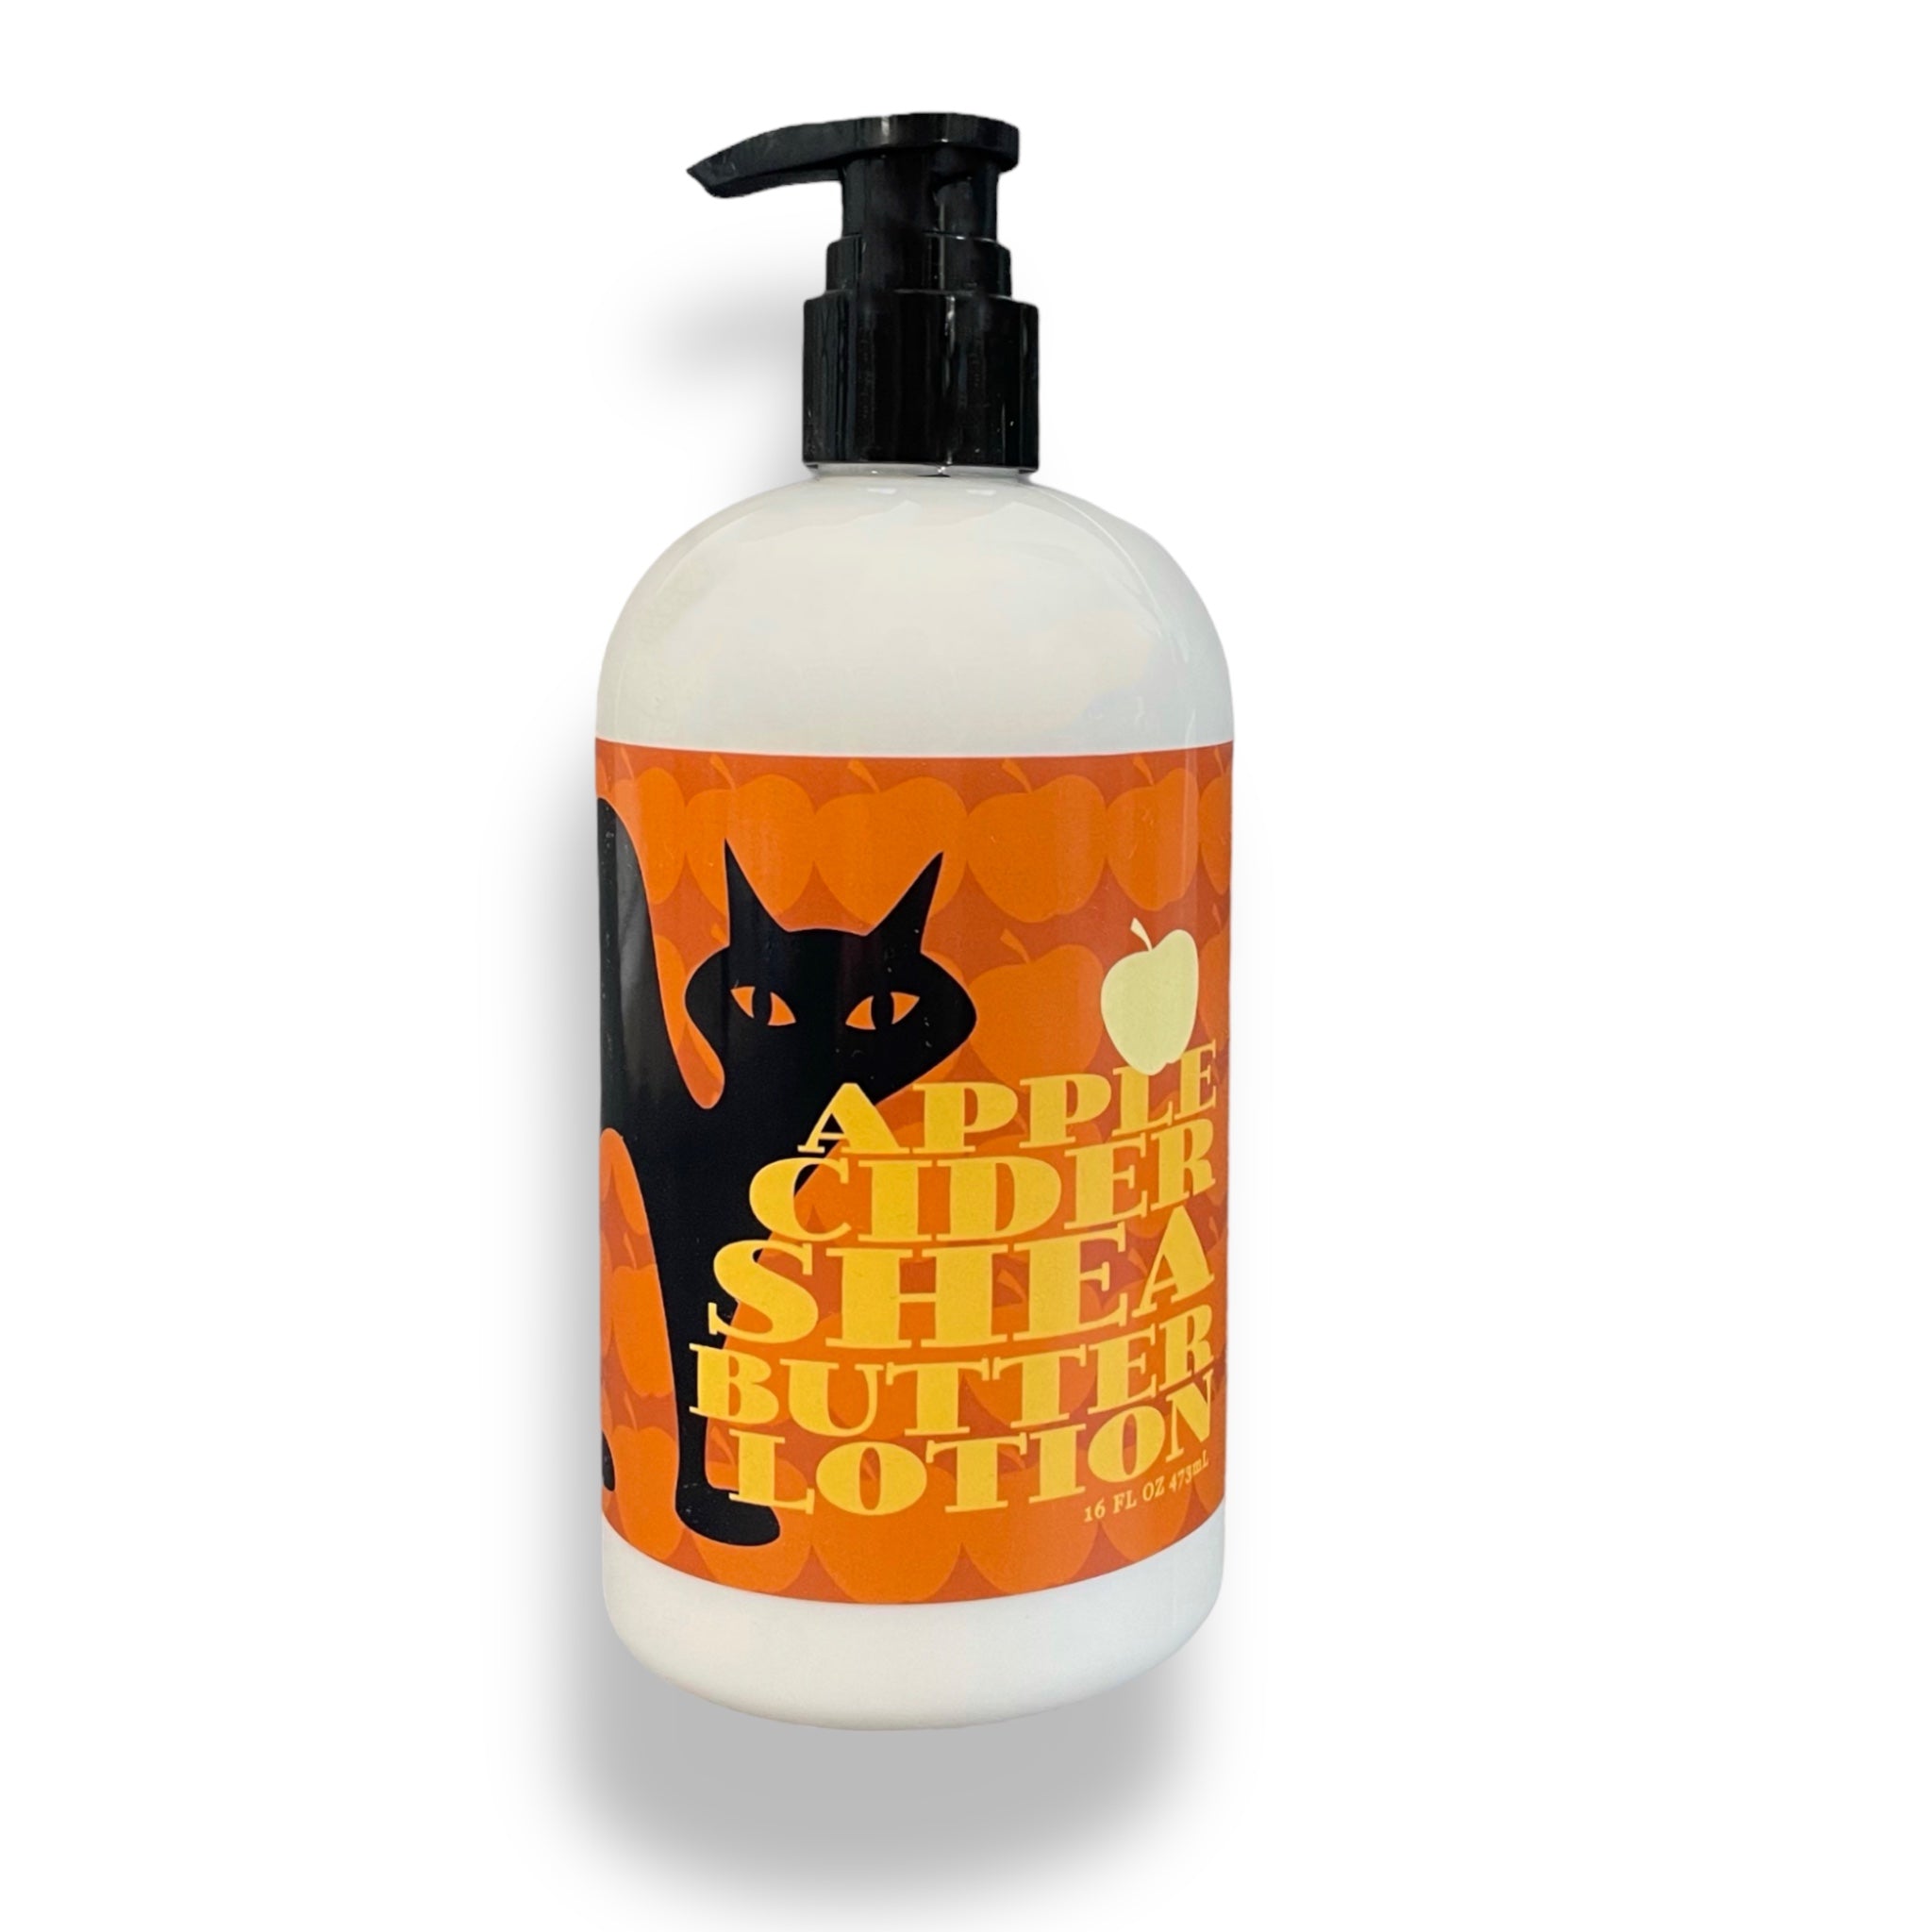 Greenwich Bay Trading Company Apple Cider Lotion